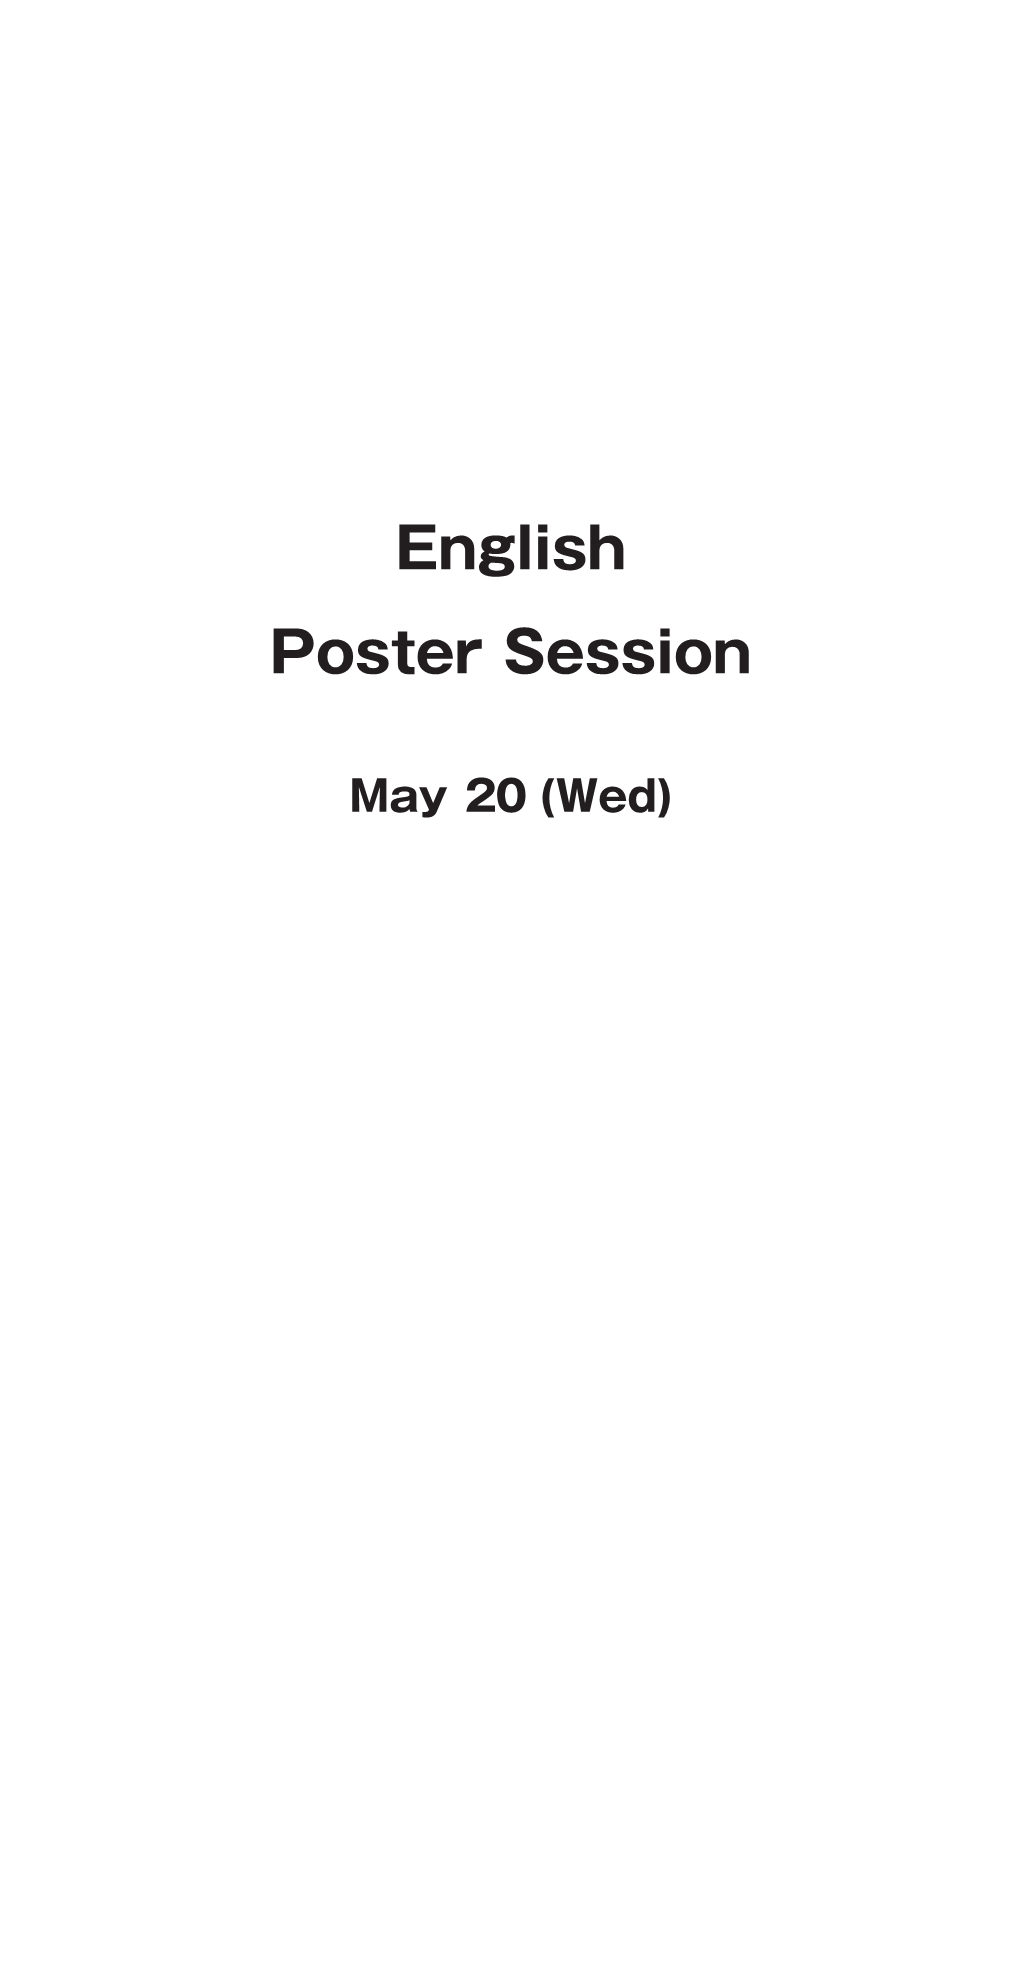 English Poster Session May 20